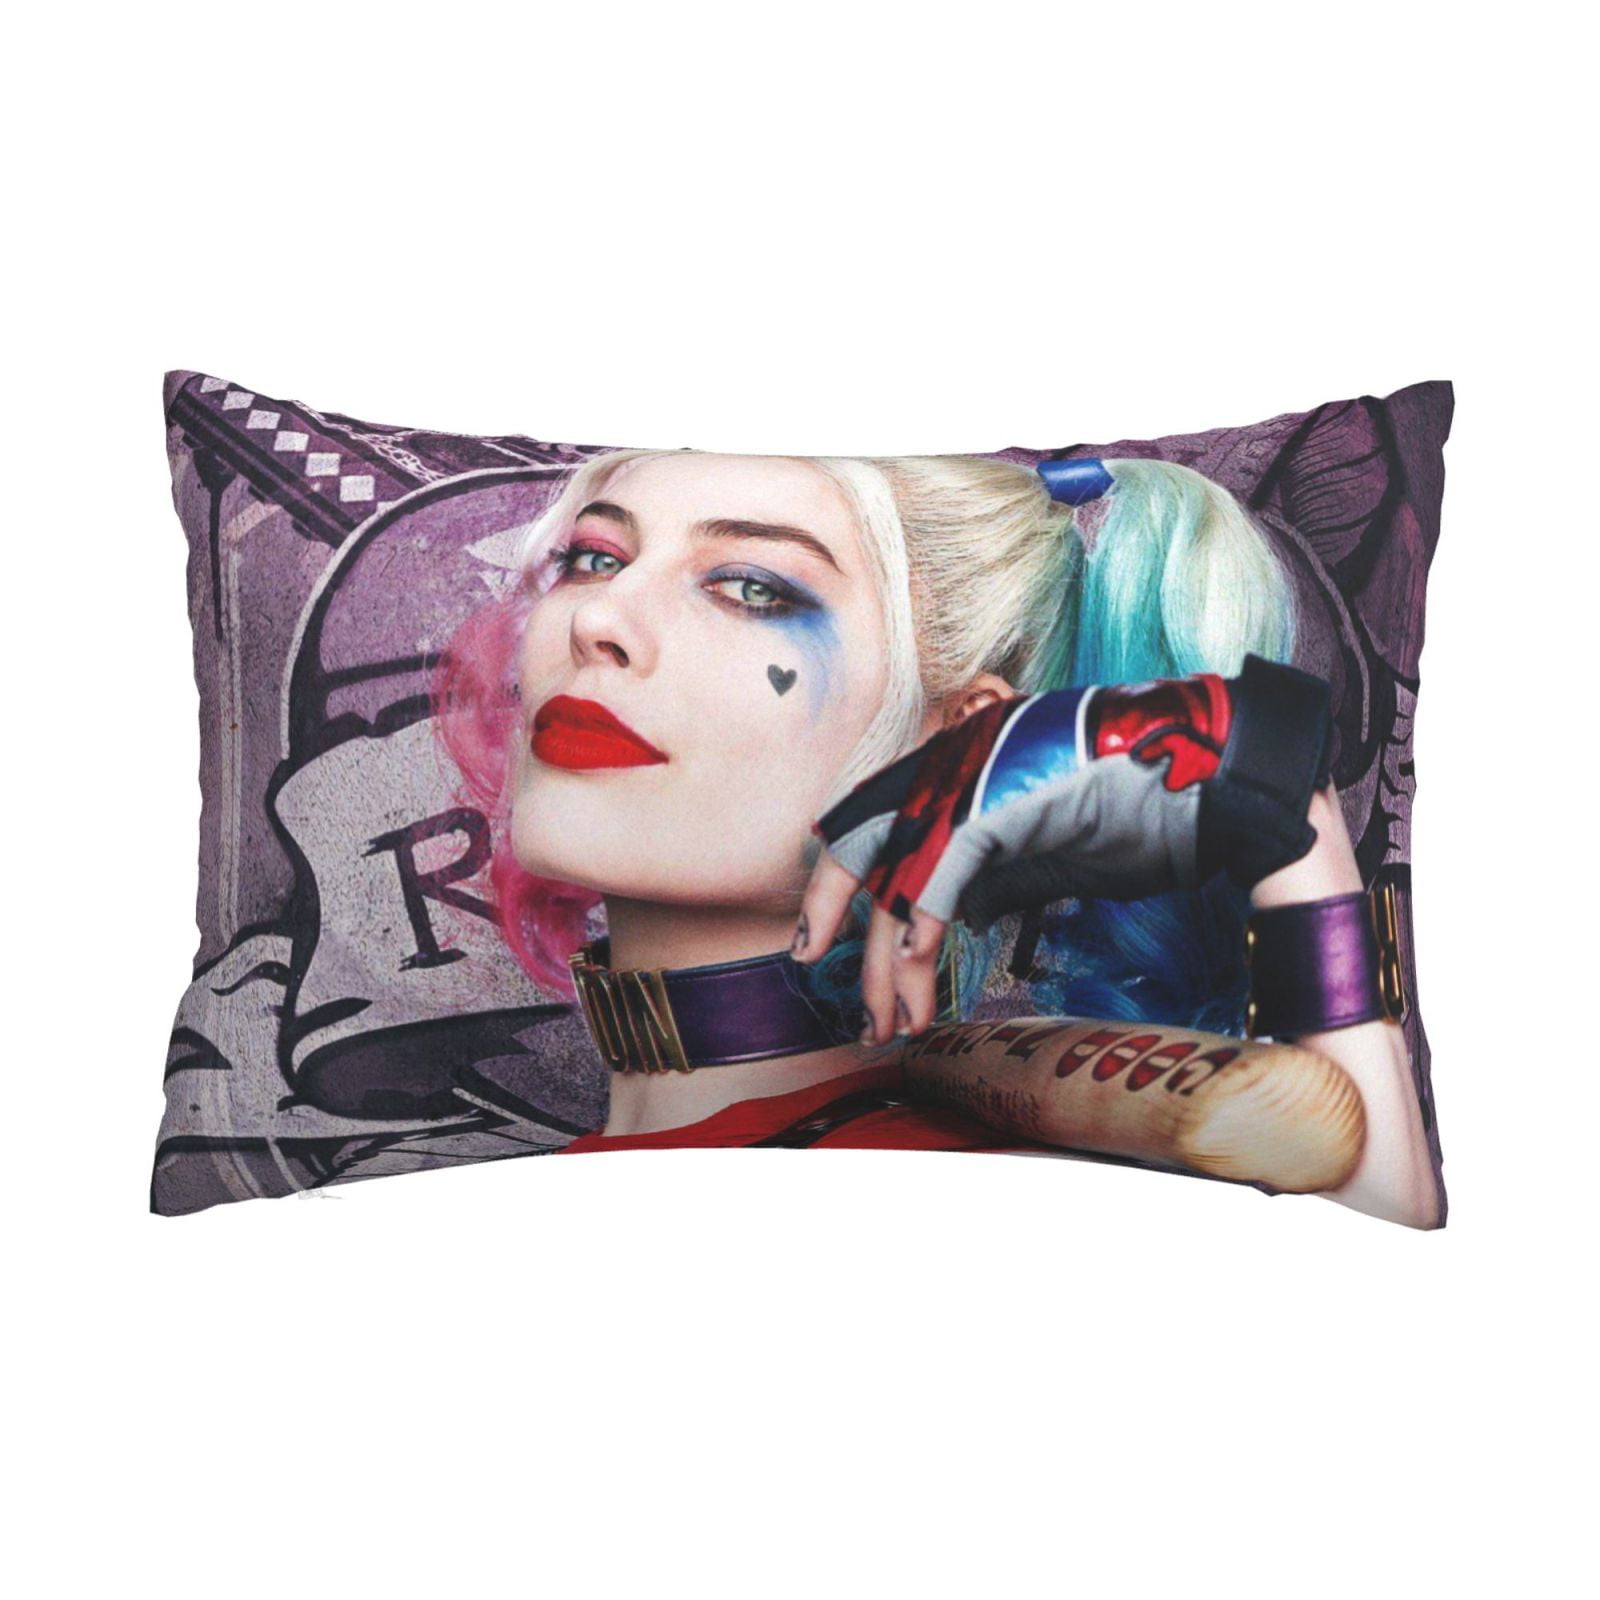 Harley Quinn And Joker Suicide Squad Pillow cover case Pillowcases